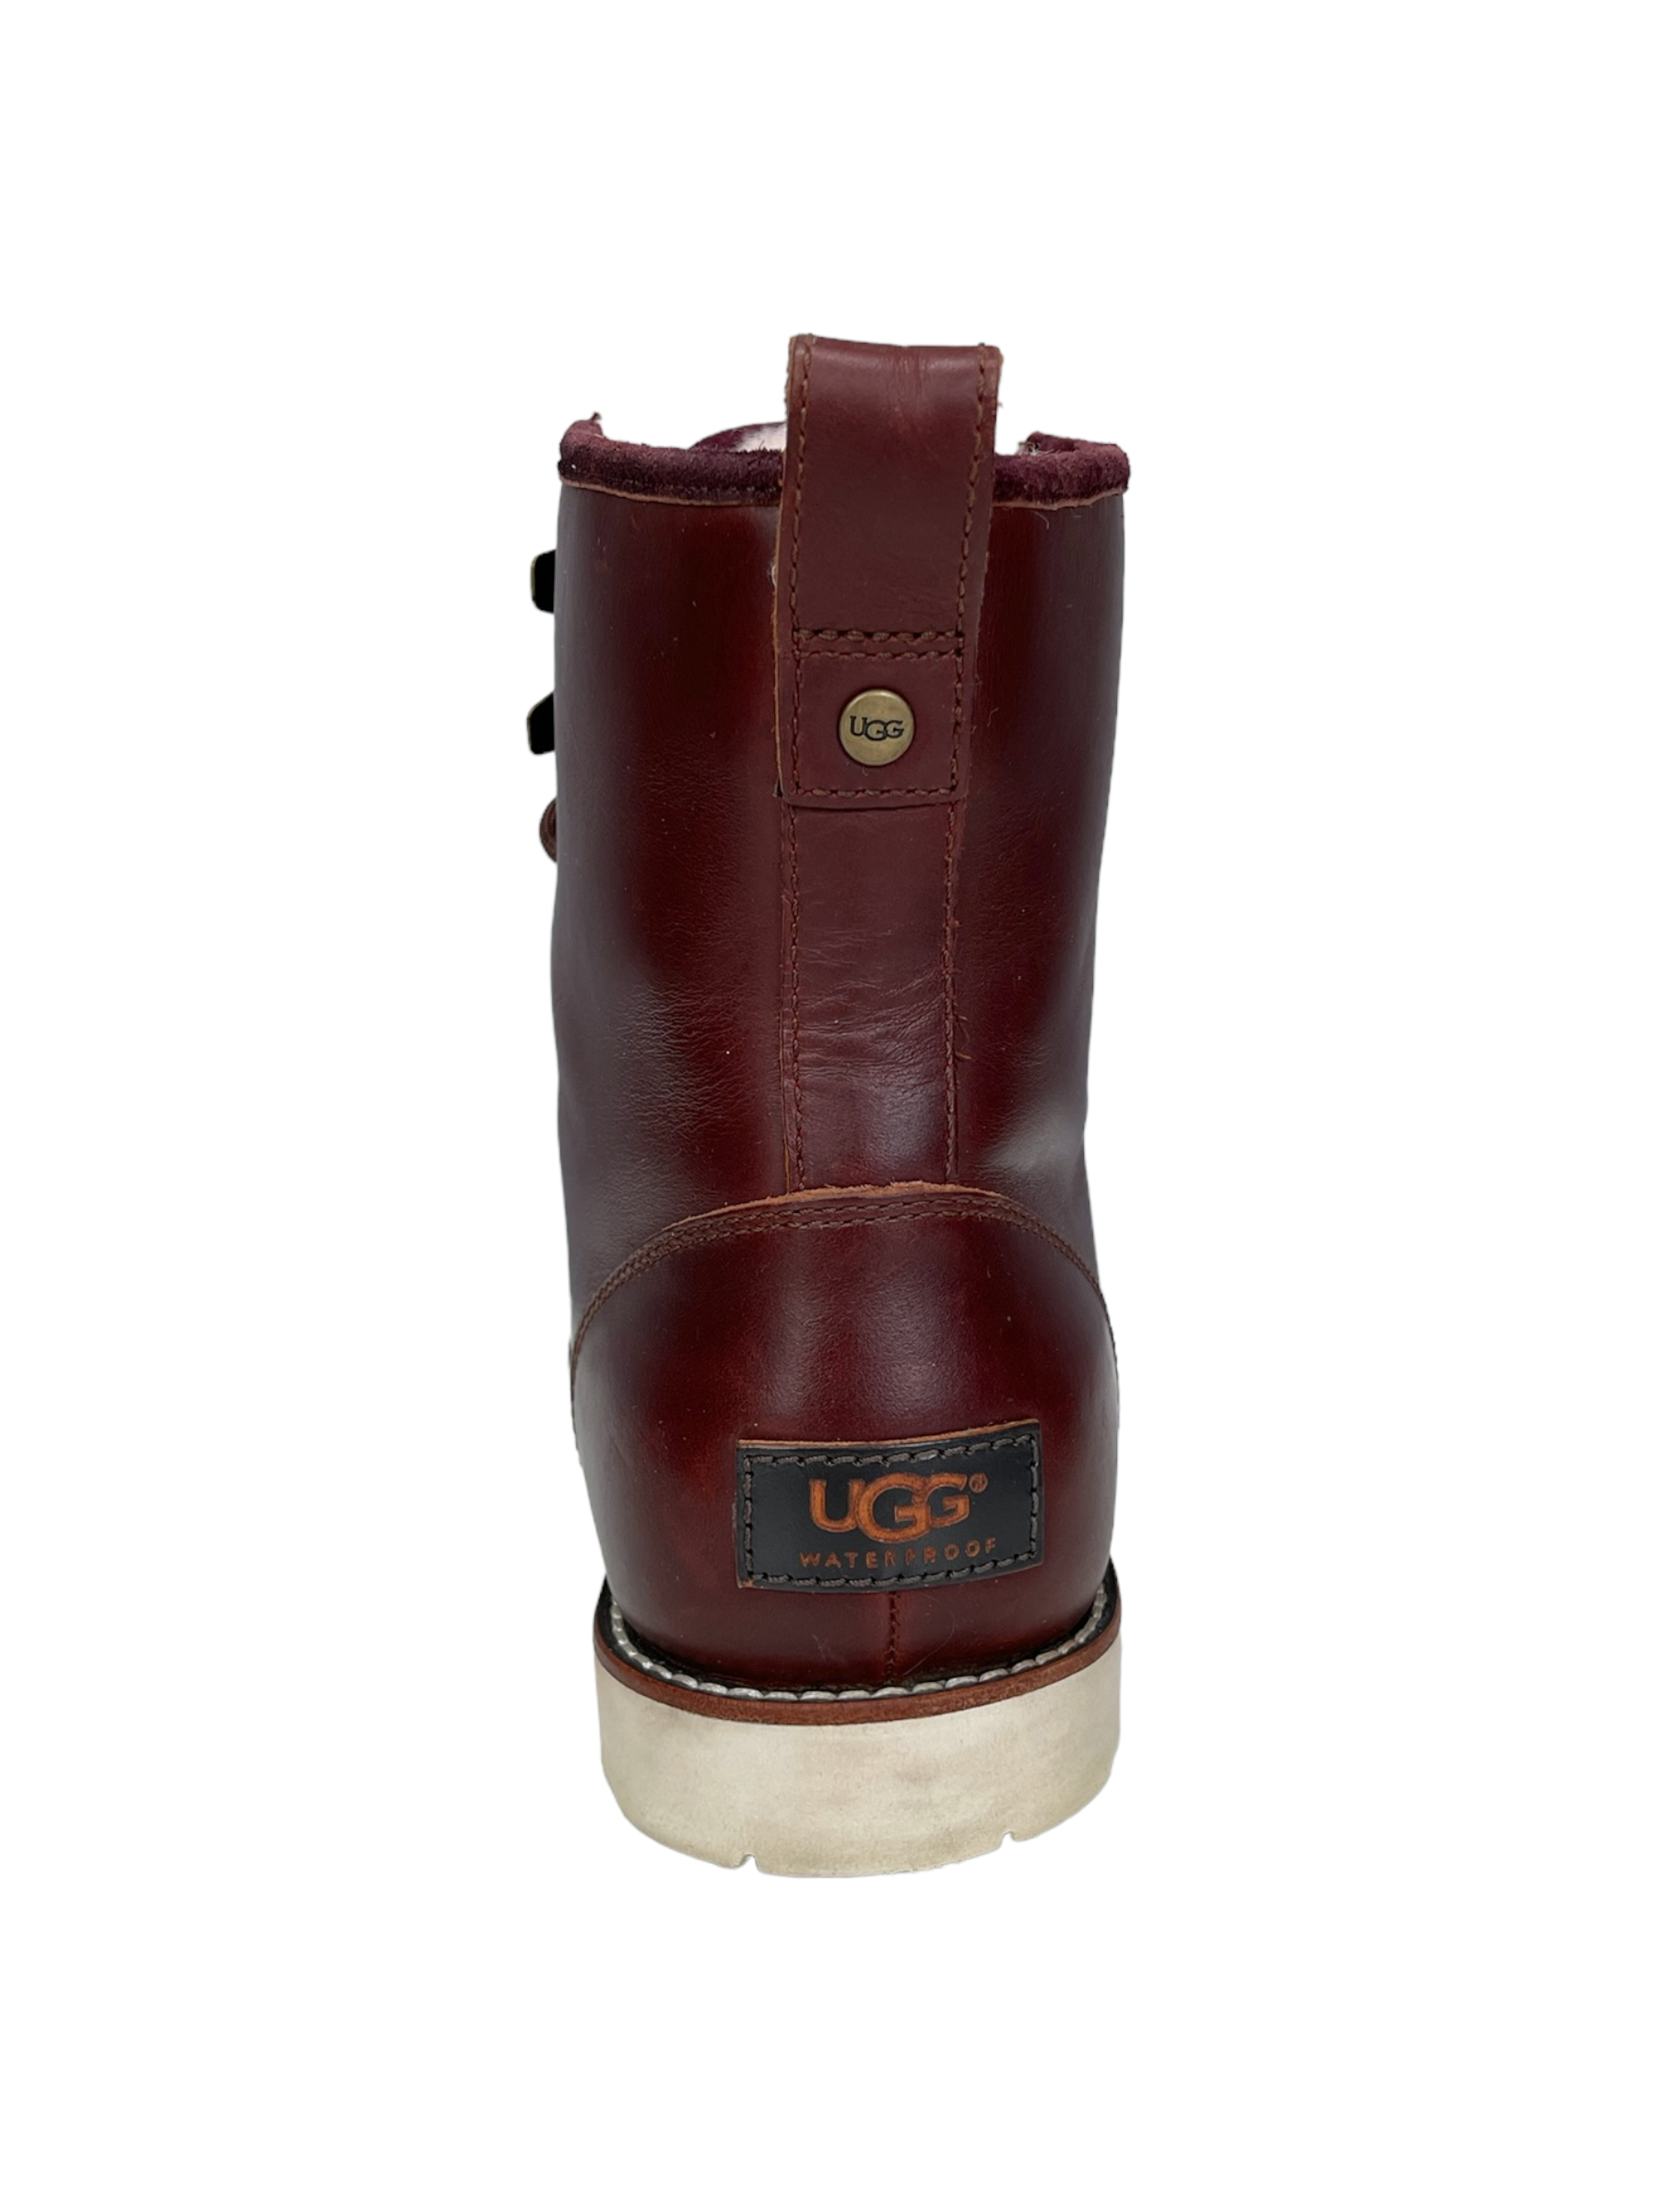 UGG Brown Insolated Fur Leather Boots 9 US- Genuine Design Luxury Consignment Calgary, Alberta, Canada New and Pre-Owned Clothing, Shoes, Accessories.